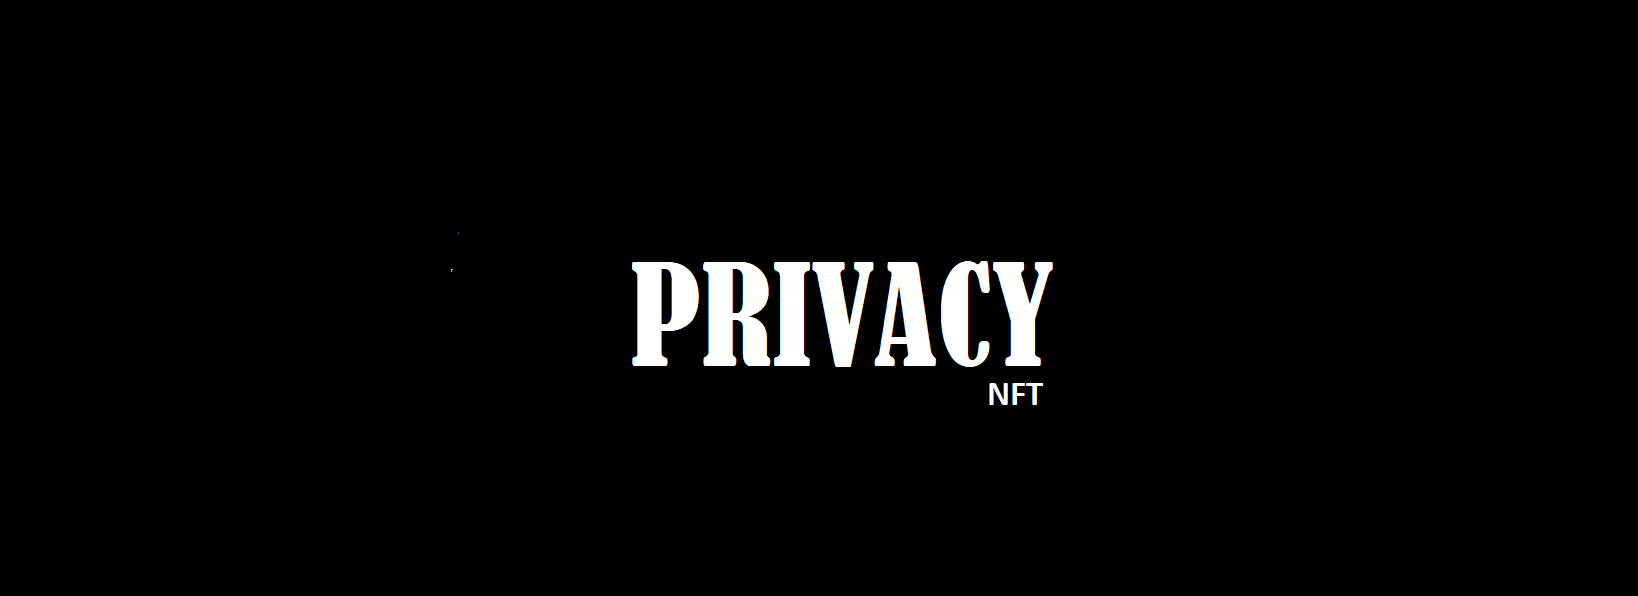 PrivacyNFT Banner